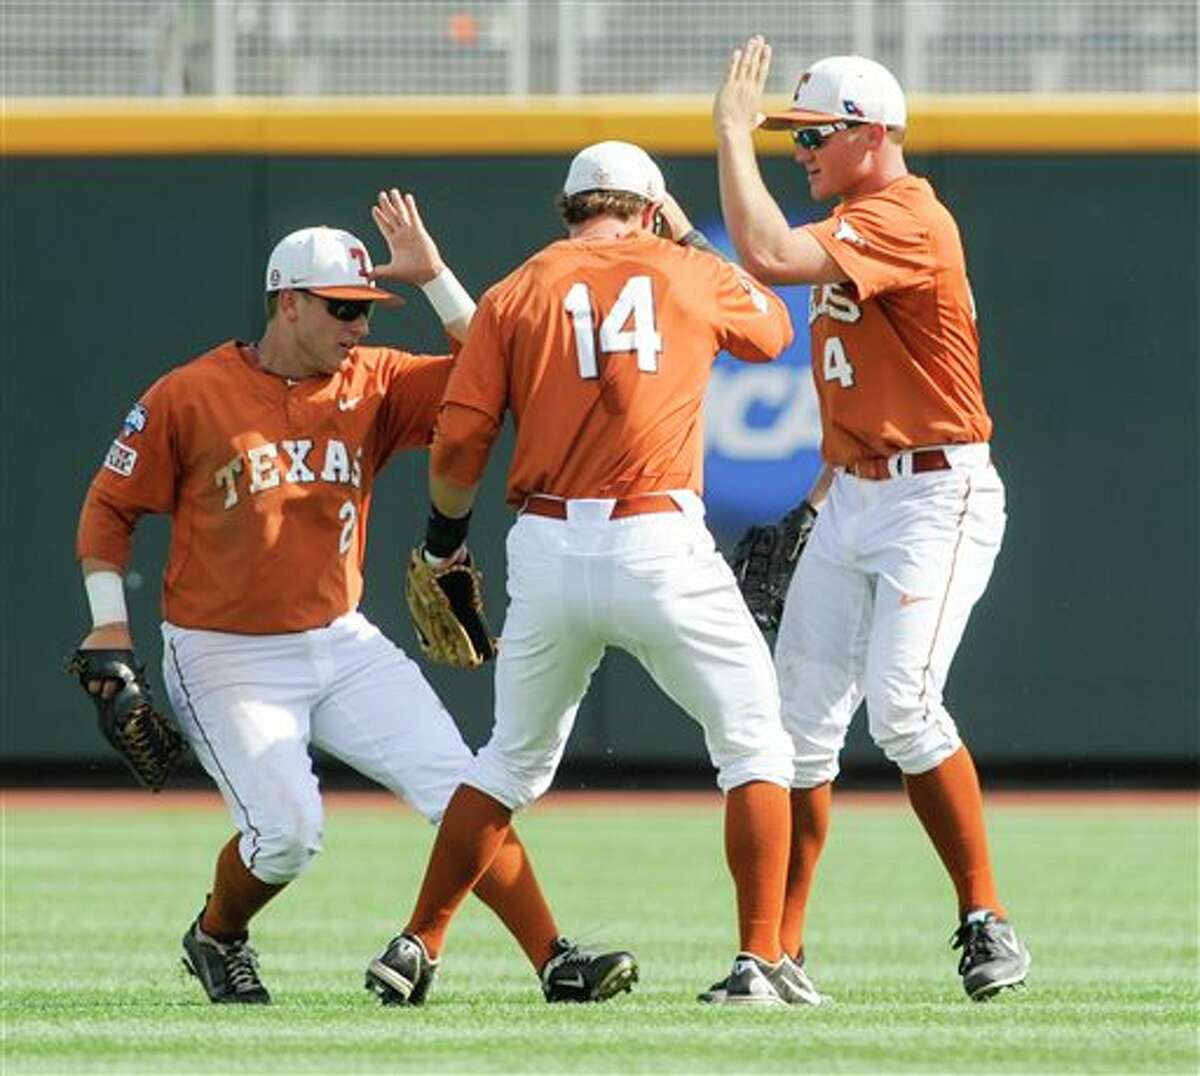 From left to right, Texas' Mark Payton, Ben Johnson and Collin Shaw celebrate after winning 4-0 against Vanderbilt in an NCAA baseball College World Series game in Omaha, Neb., Friday, June 20, 2014. (AP Photo/Eric Francis)